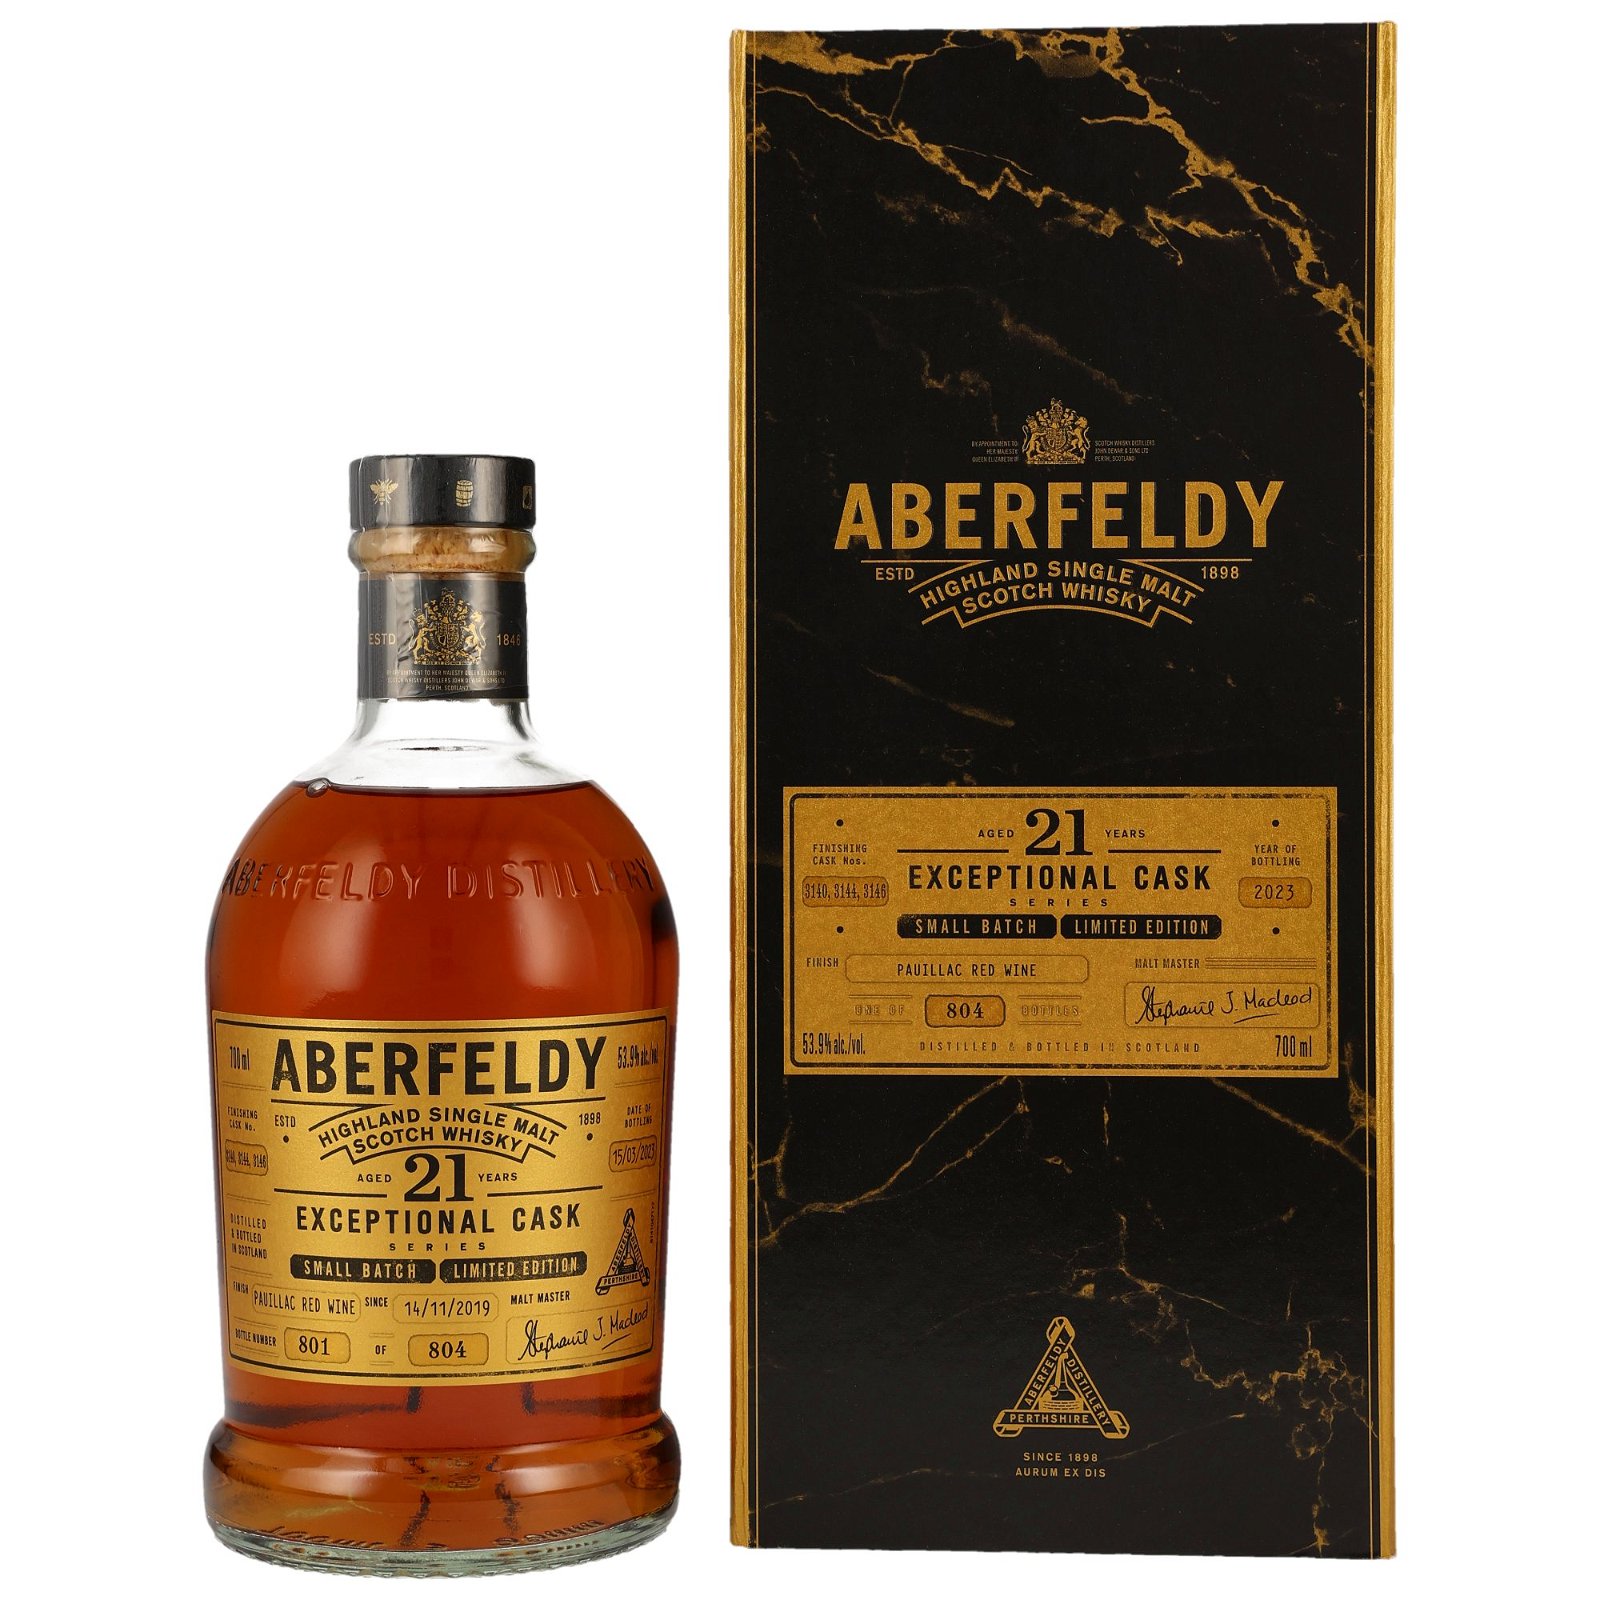 Aberfeldy 21 Jahre Pauillac Red Wine Finish Exceptional Cask Series